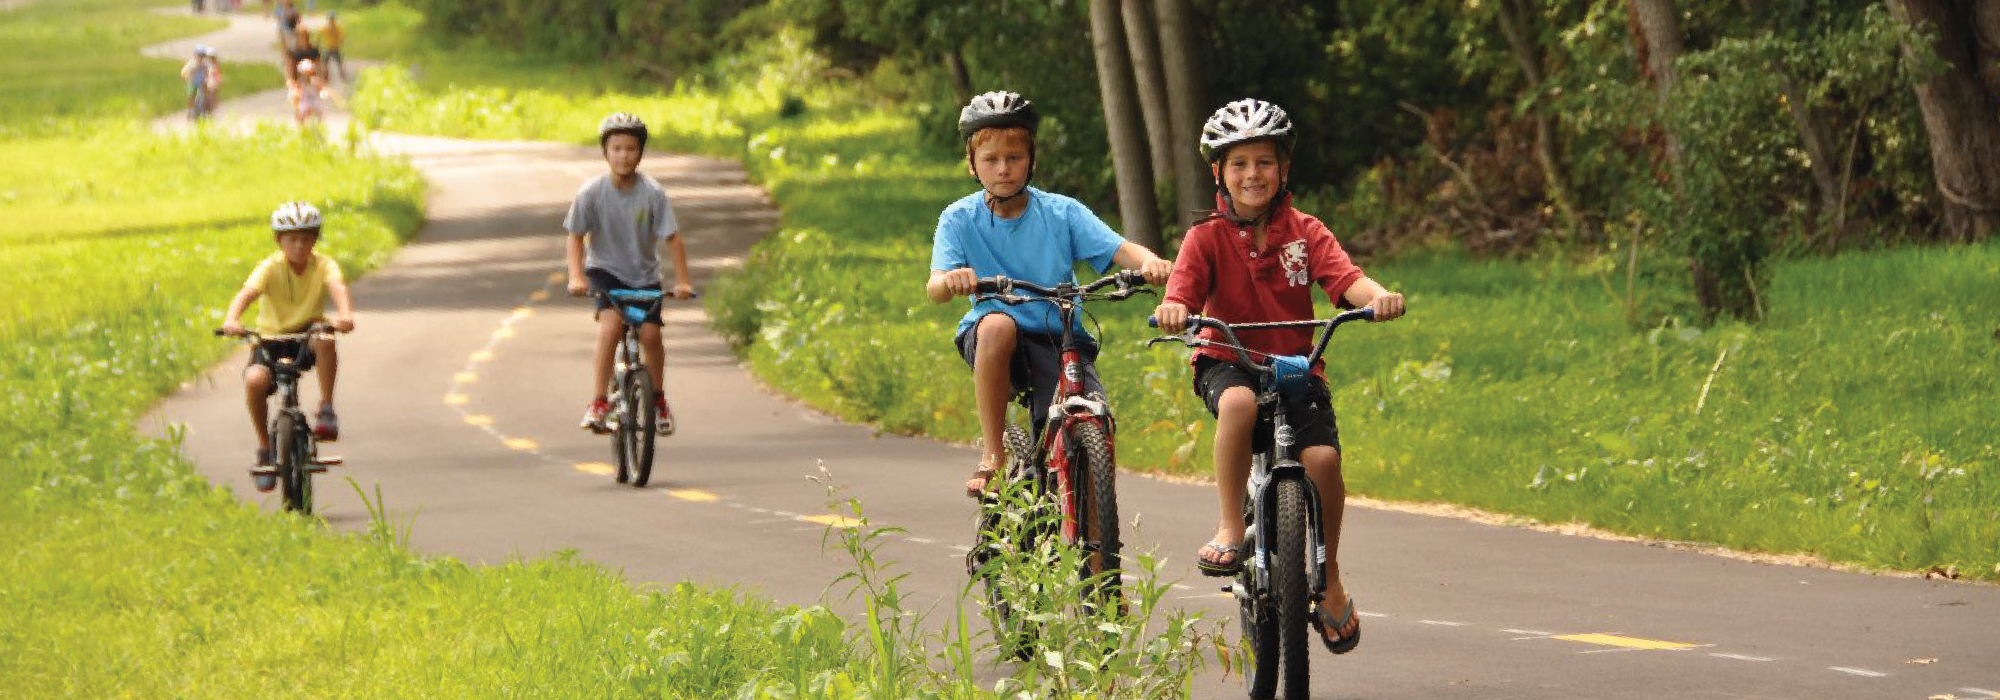 PHP's Foundation's Vision for a Healthier Indiana: Kids riding bikes on Fort Wayne Trails